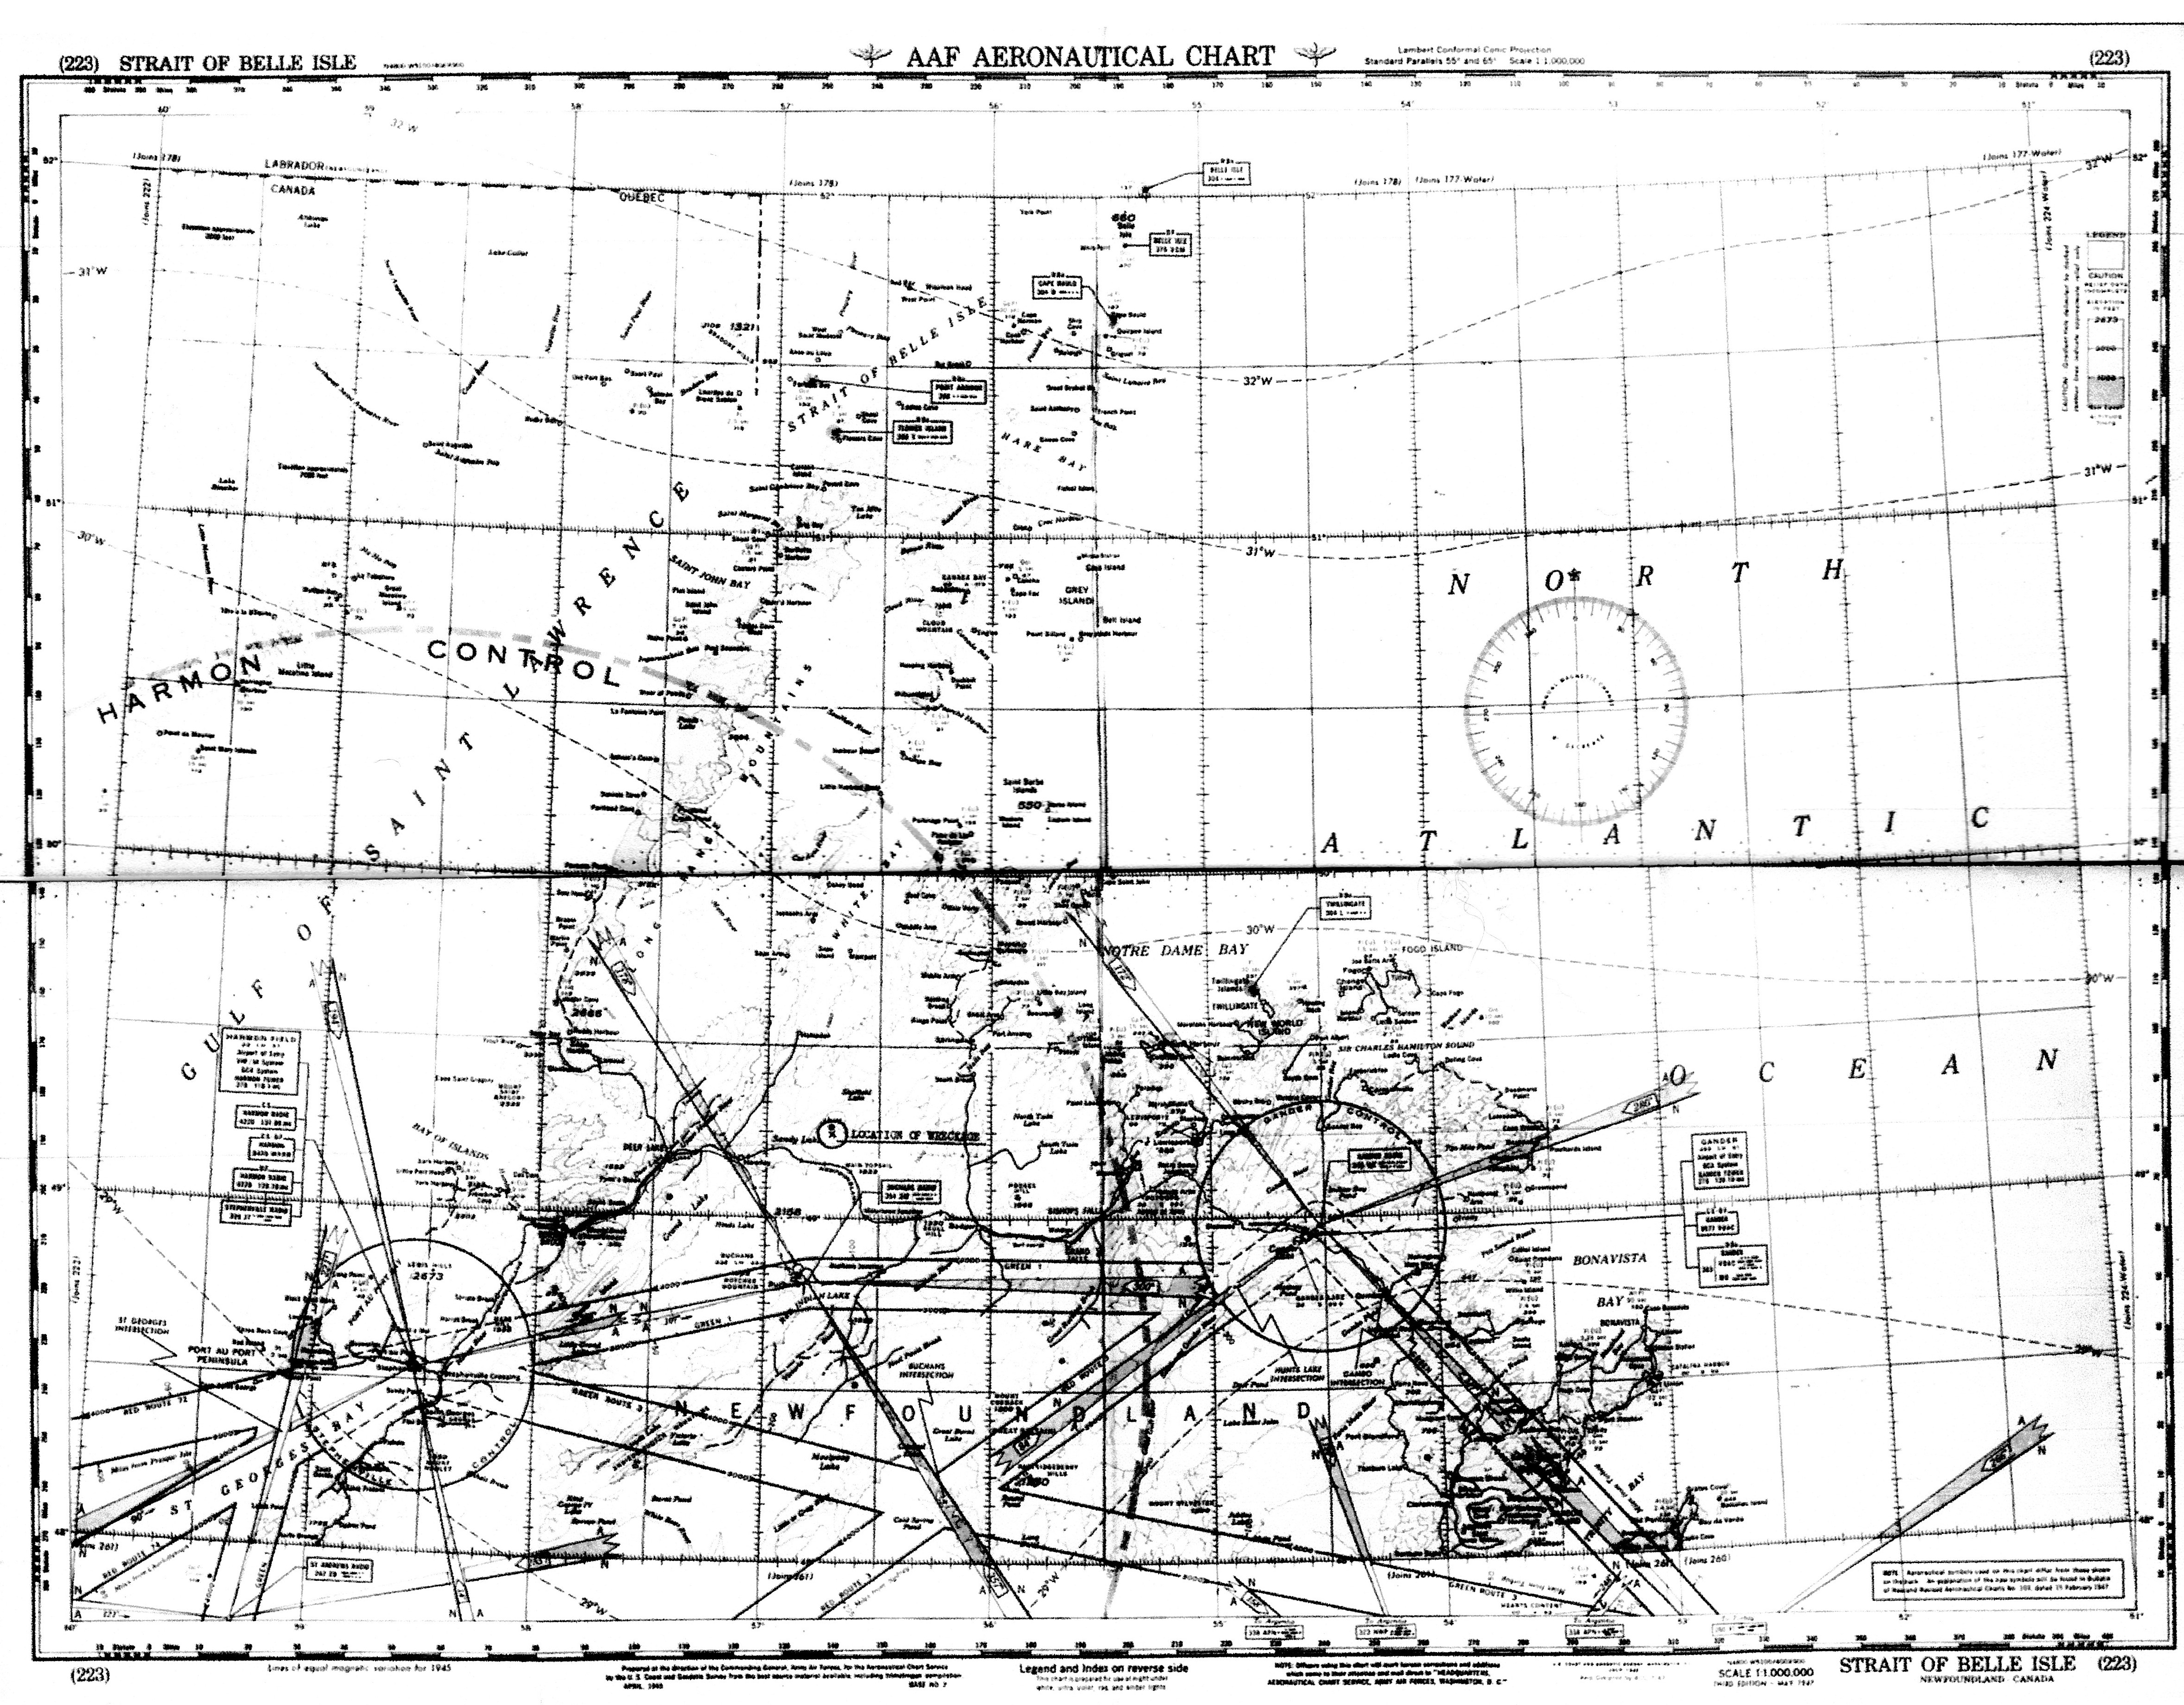 AAF Aeronautical Chart indicating Harmon Control and Gander Control plus the location of the wreckage. From Griffing et al. 1947.